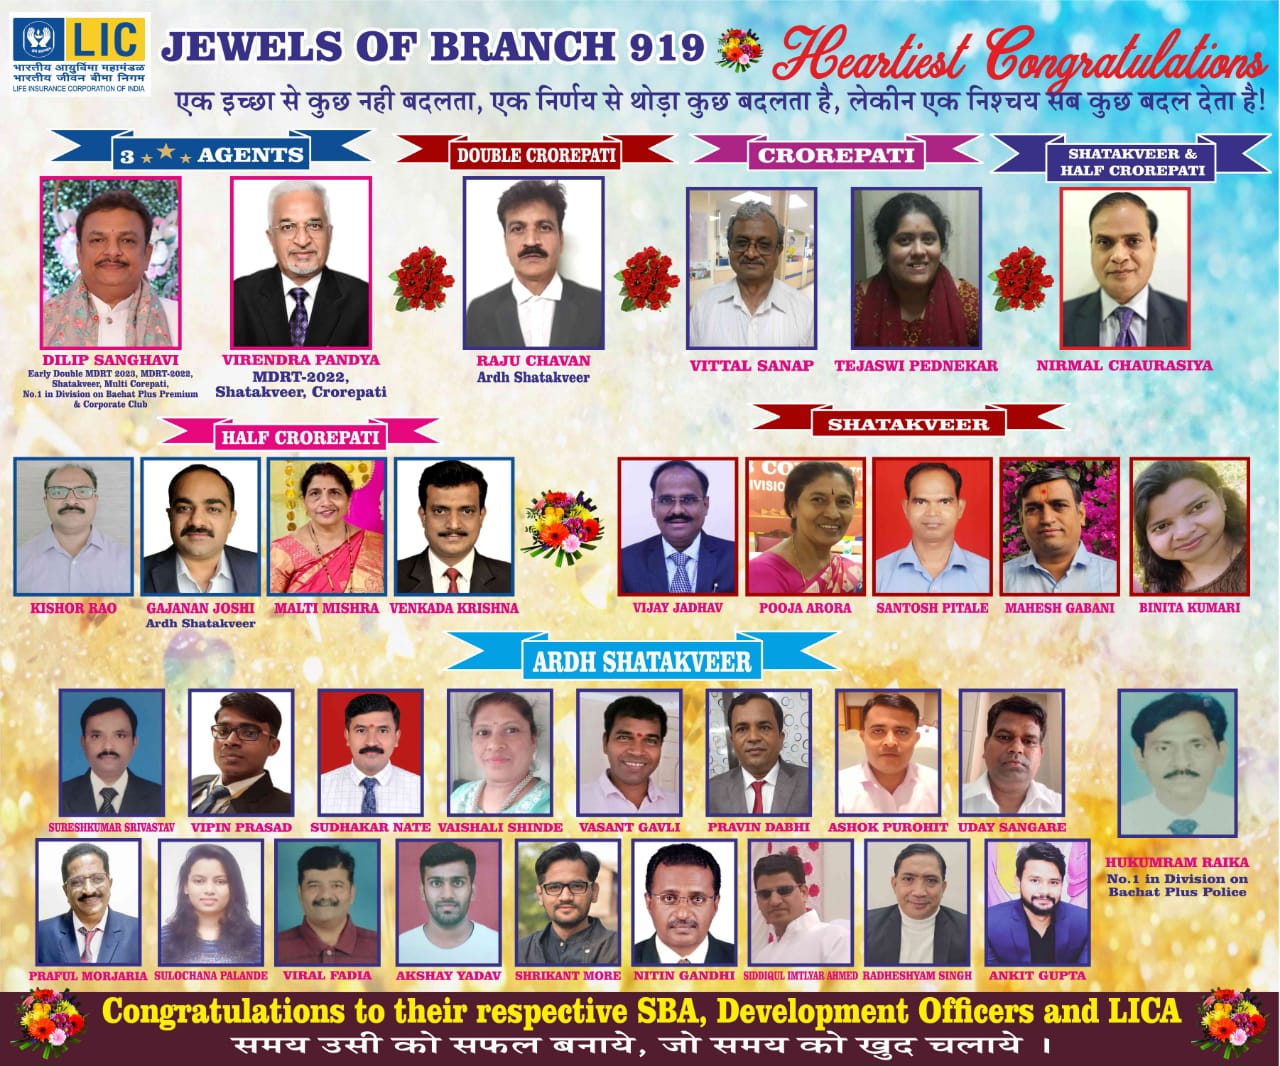 Jewels of Branch 919